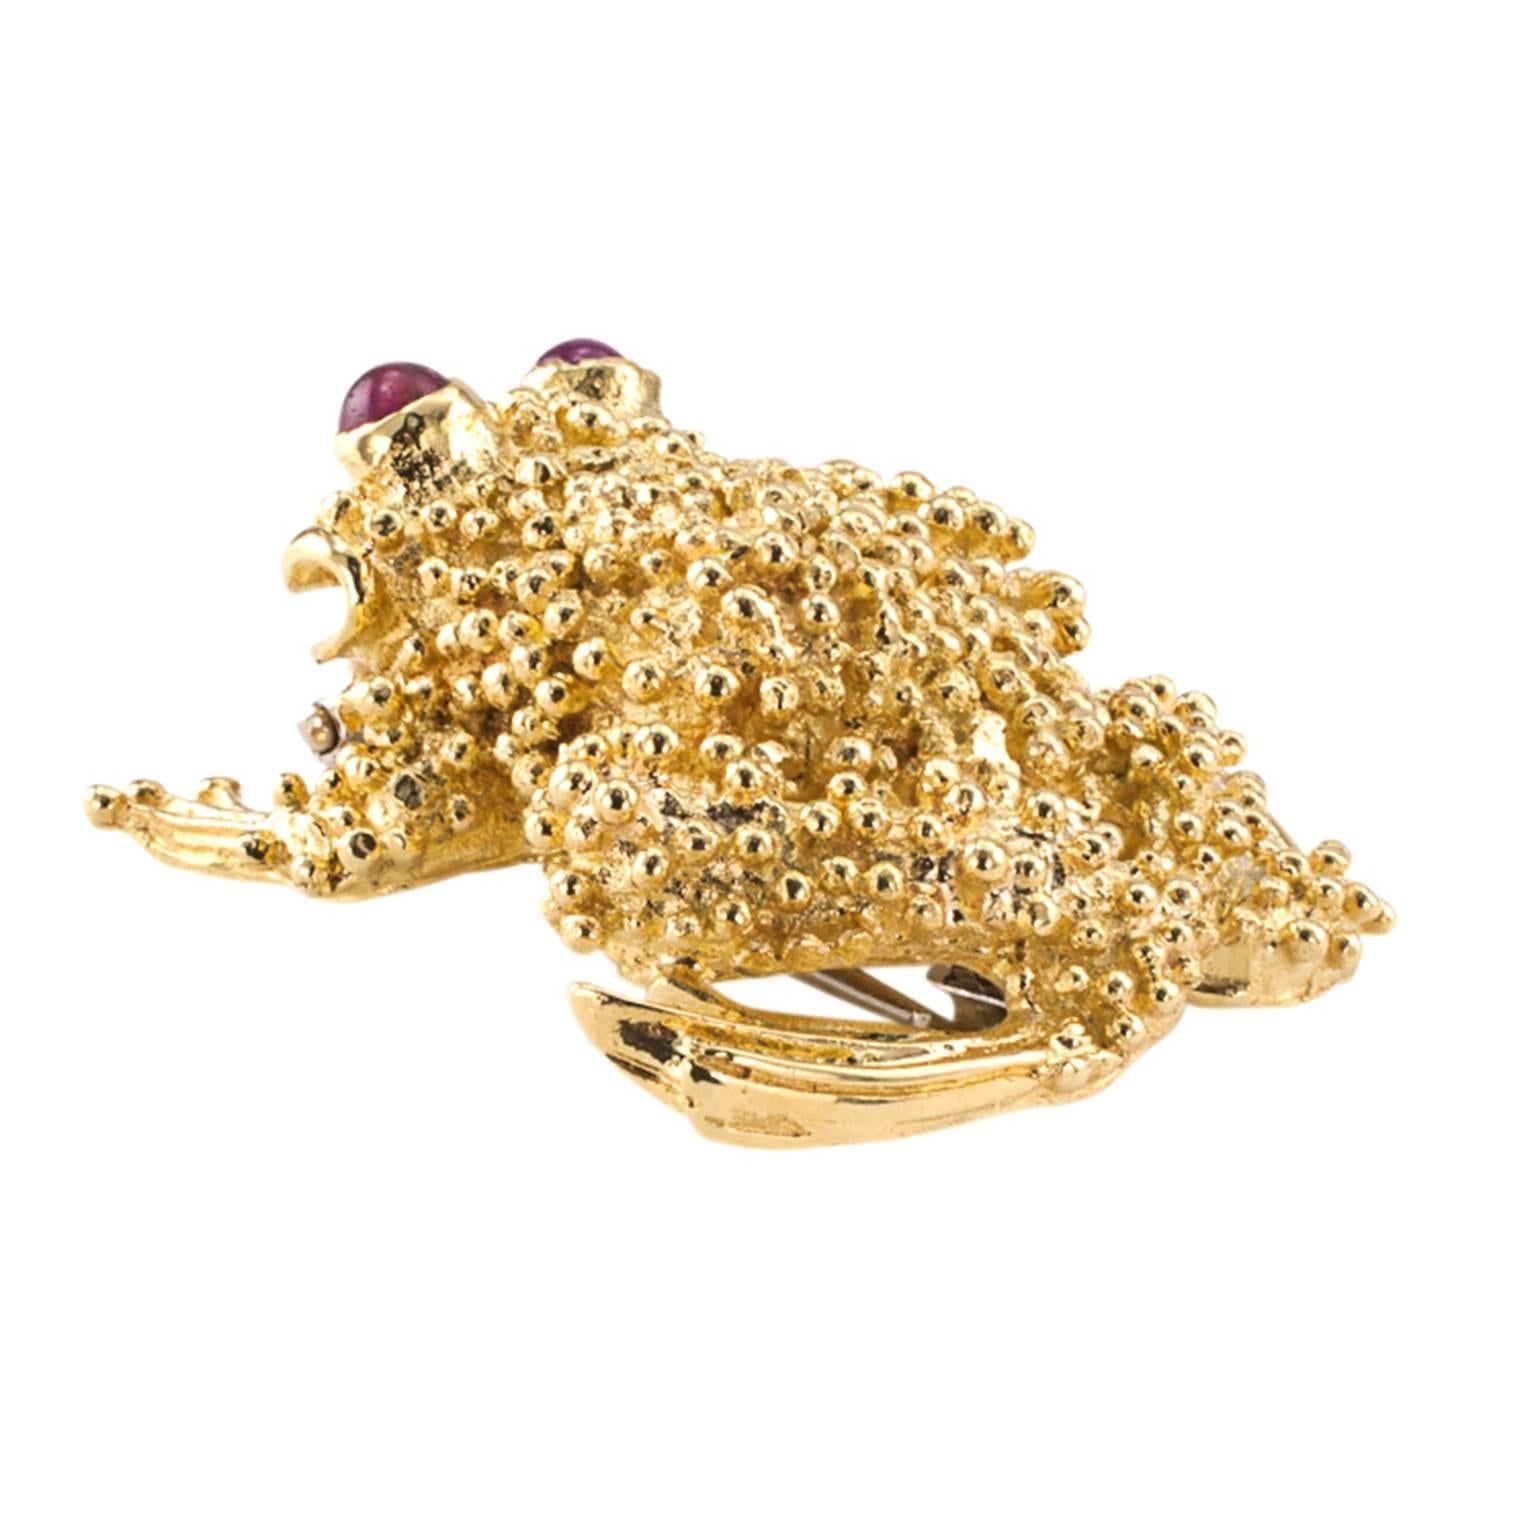 Toad Brooch in 18 Karat Yellow Gold and Cabachon Ruby Eyes

Cute, cute... That smile! Irresistible.  It might be a prince in disguise, after all.  An 18 karat gold toad with ruby eyes and that smile.  It will make you smile right back at it. 